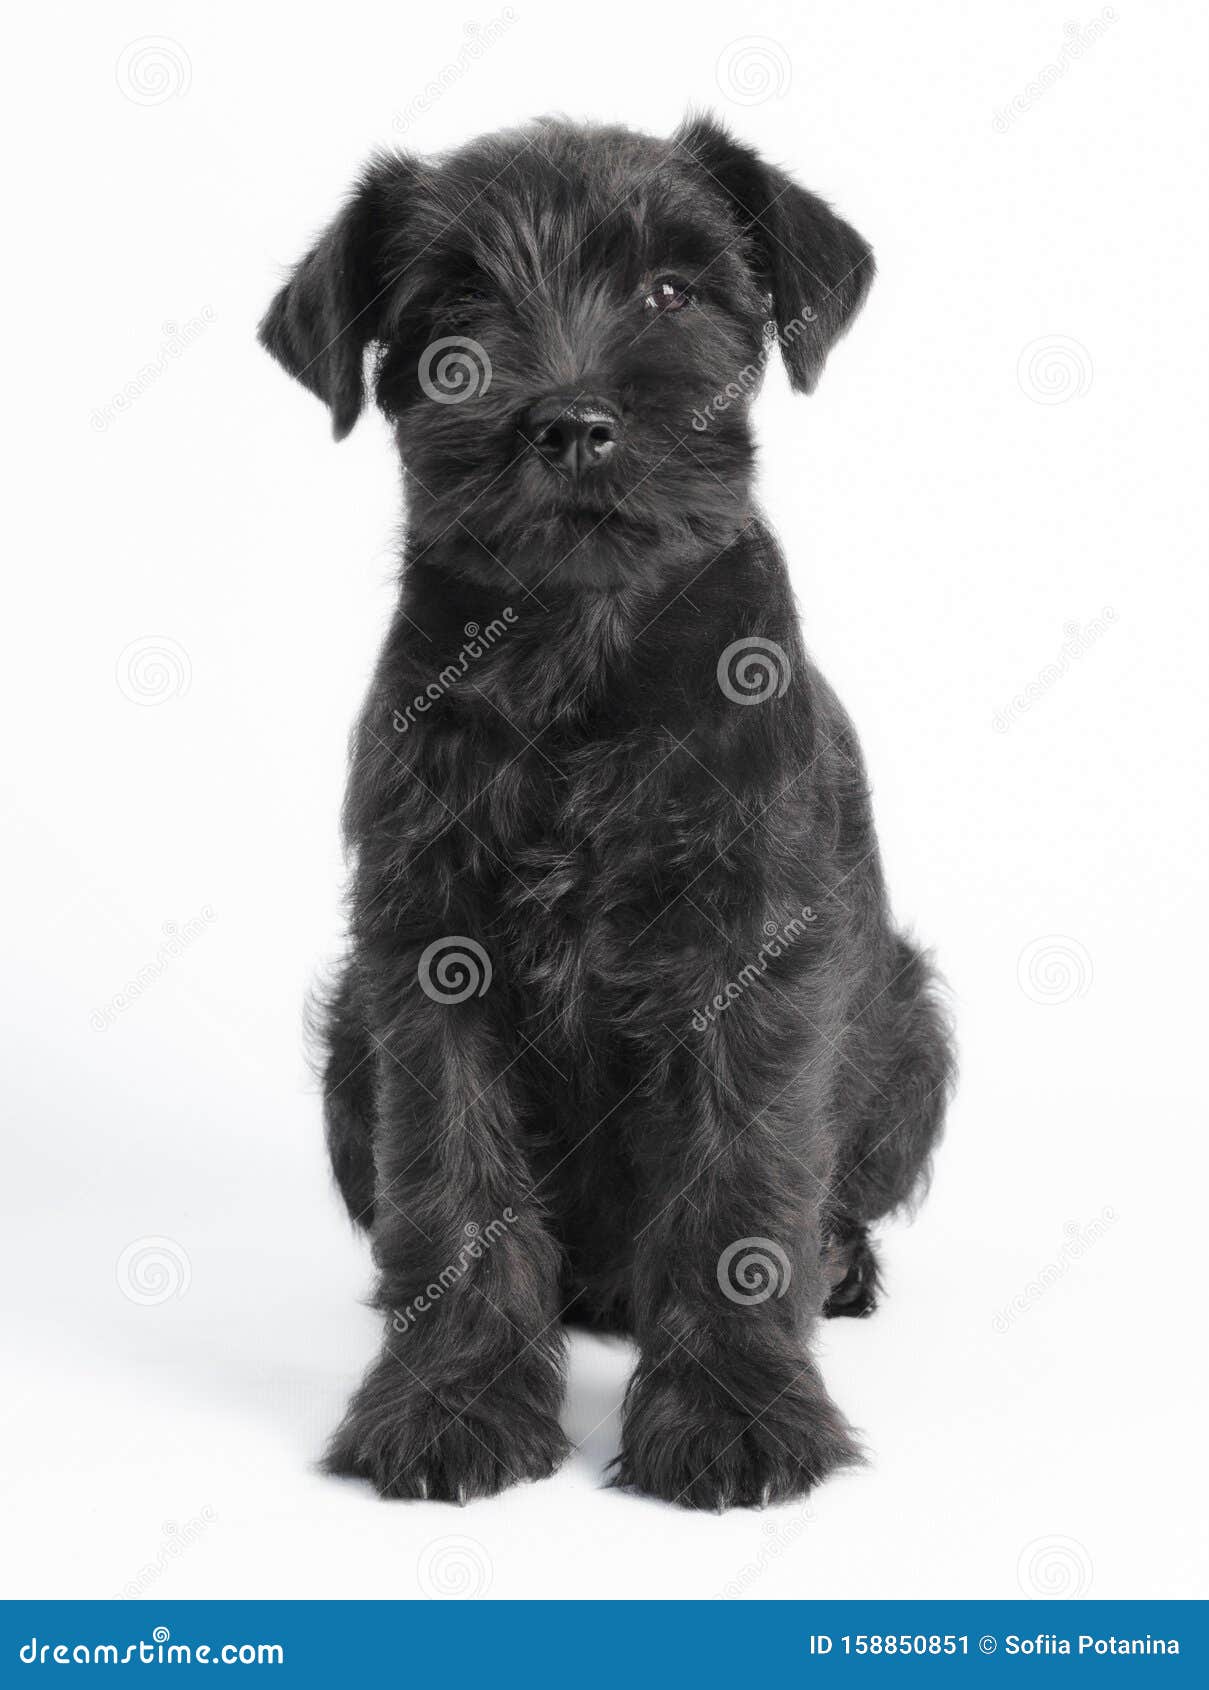 Little Black Puppy Breed Miniature Schnauzer On A White Background Close Up Isolated Stock Image Image Of Look Mini 158850851